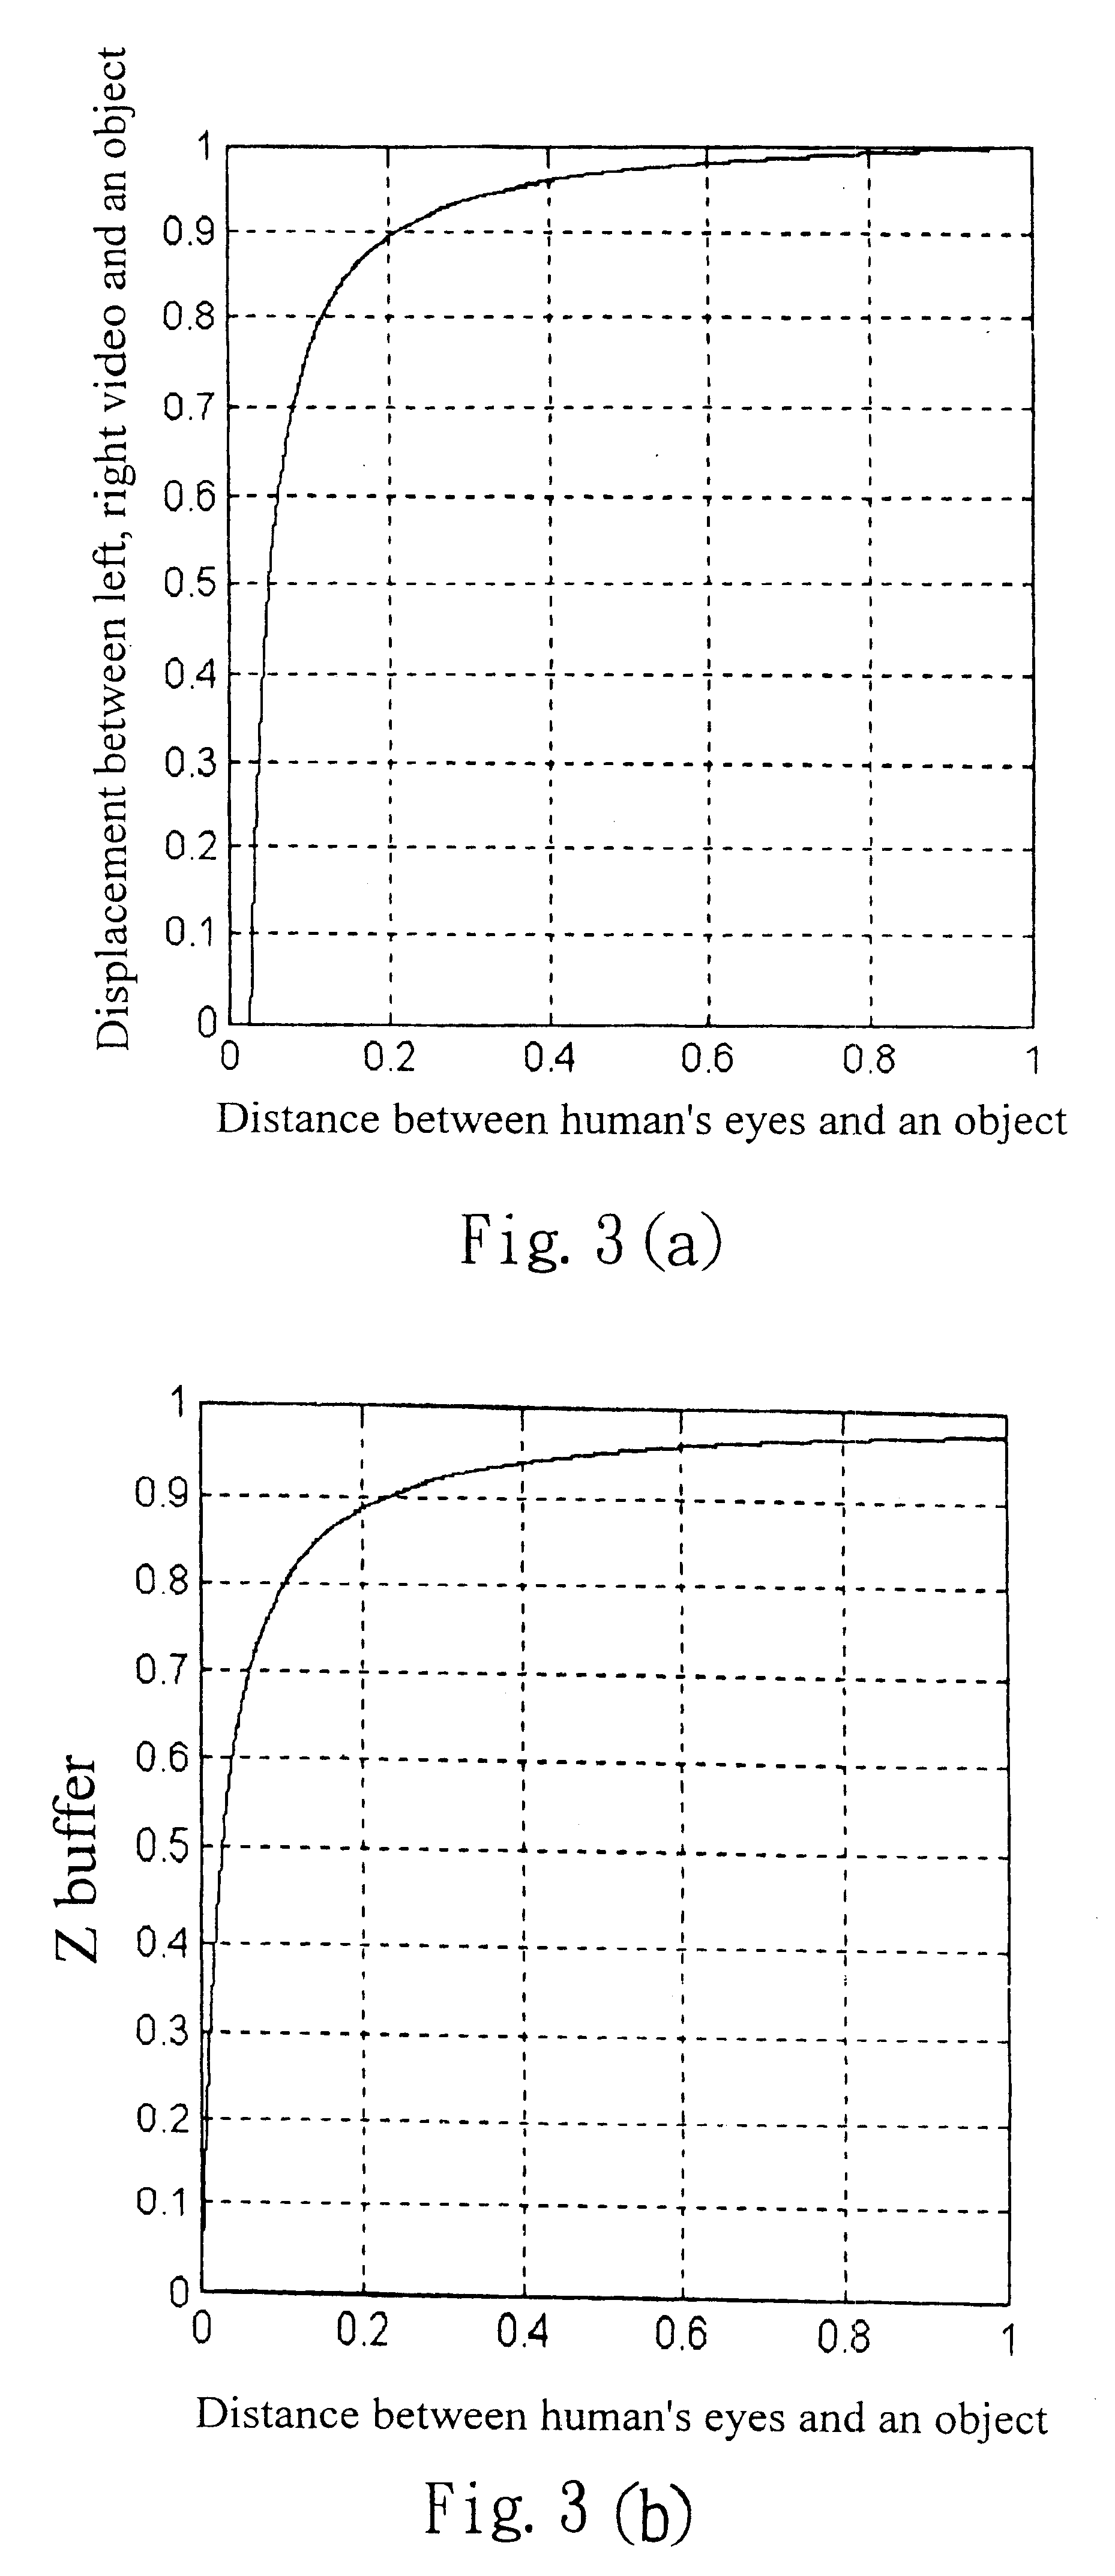 Apparatus and method for adjusting 3D stereo video transformation